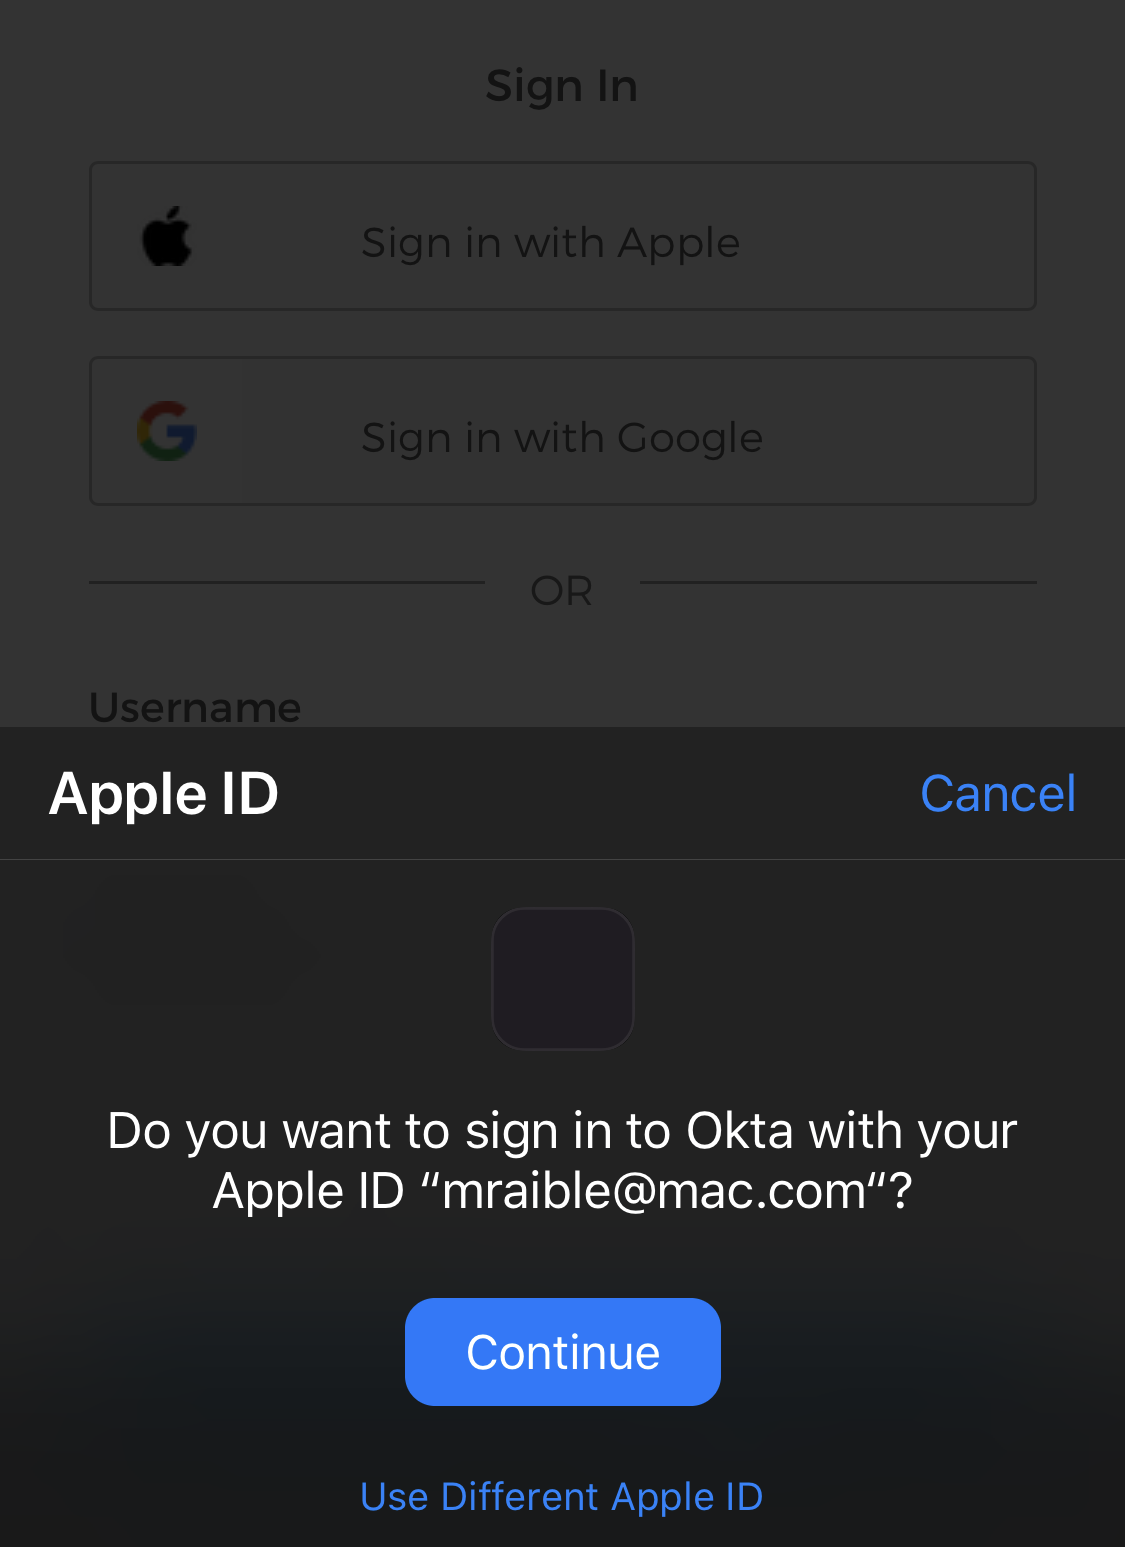 Sign in with Apple on iPhone 11